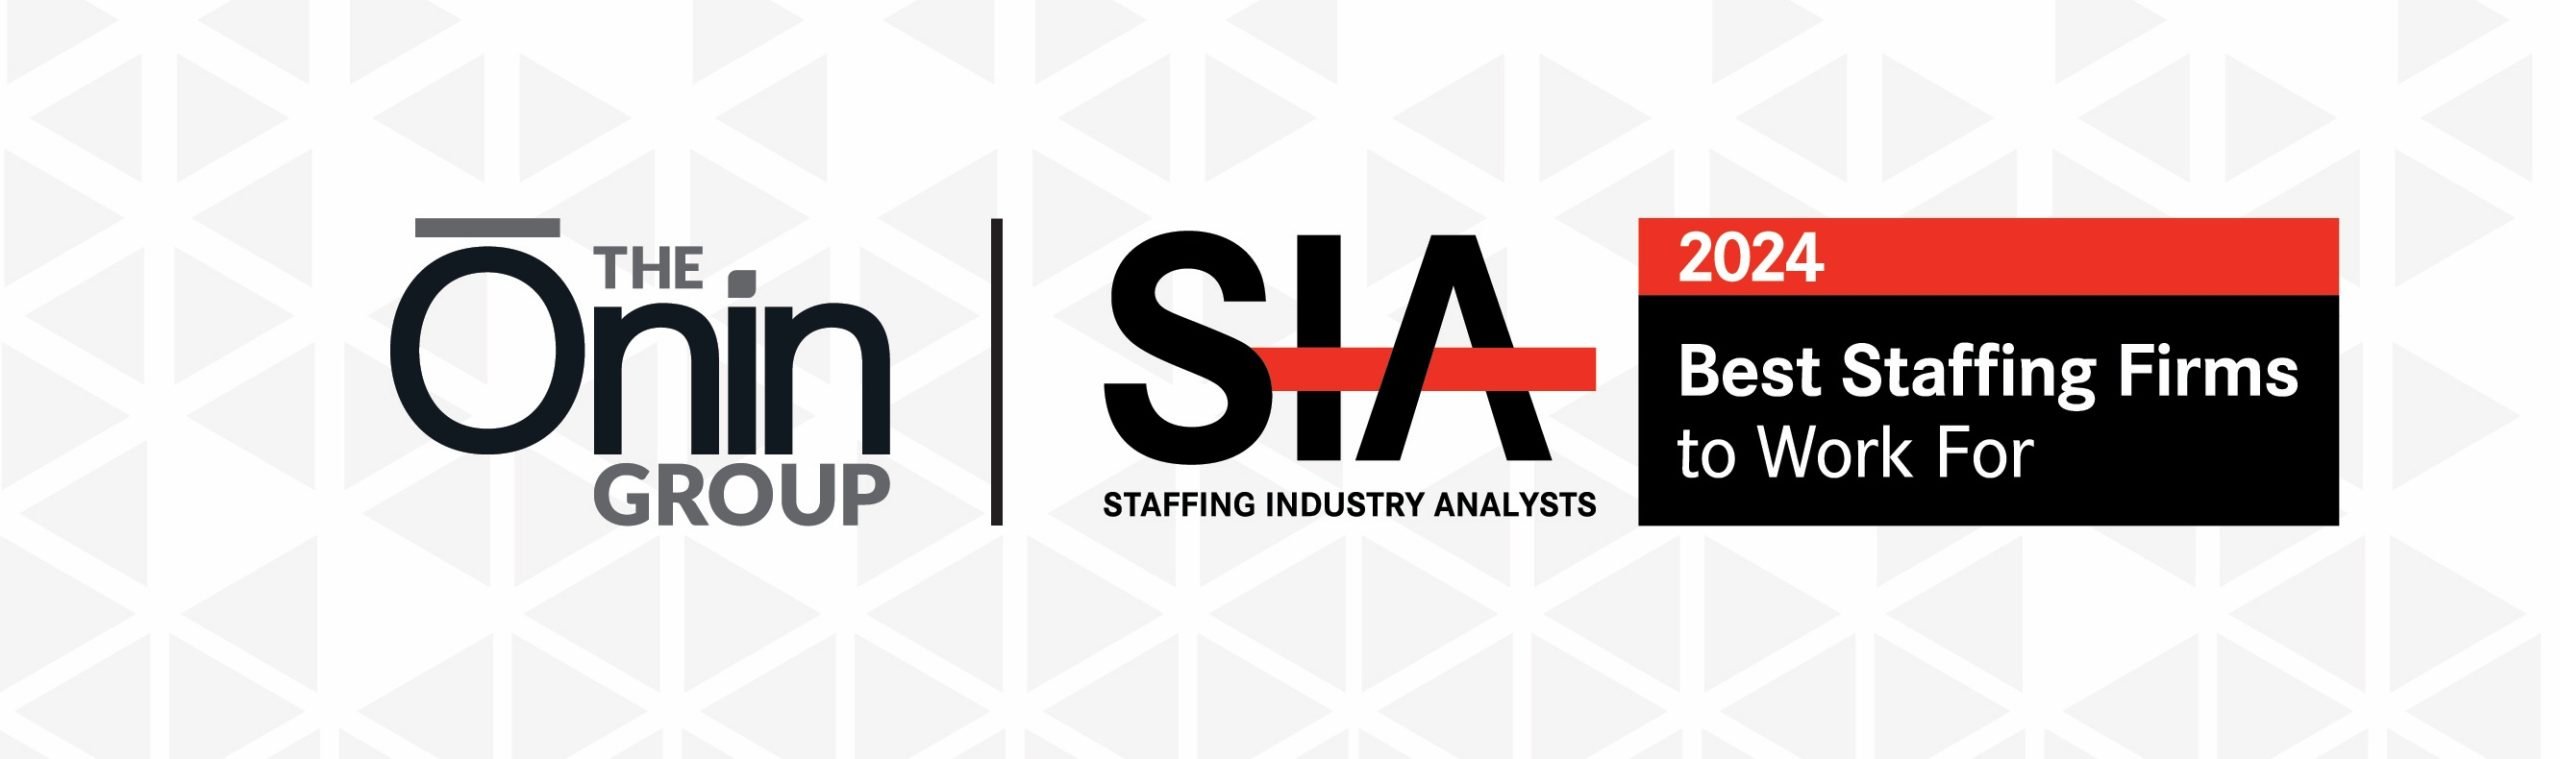 The Ōnin Group Named an SIA Best Staffing Firm to Work for the Fourth Consecutive Year